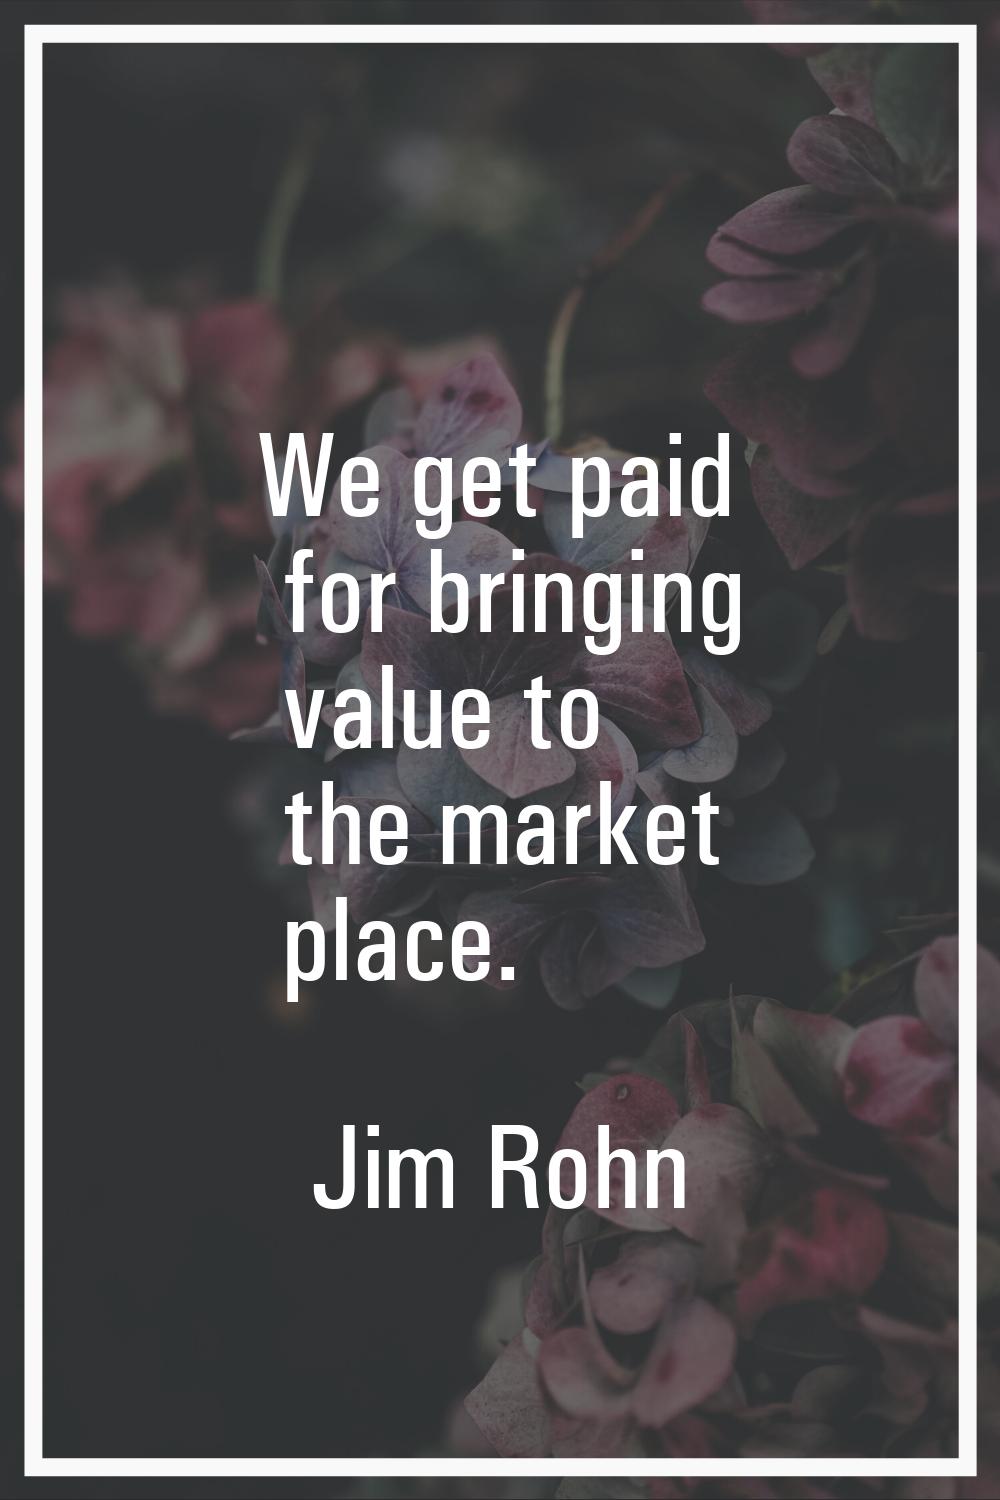 We get paid for bringing value to the market place.